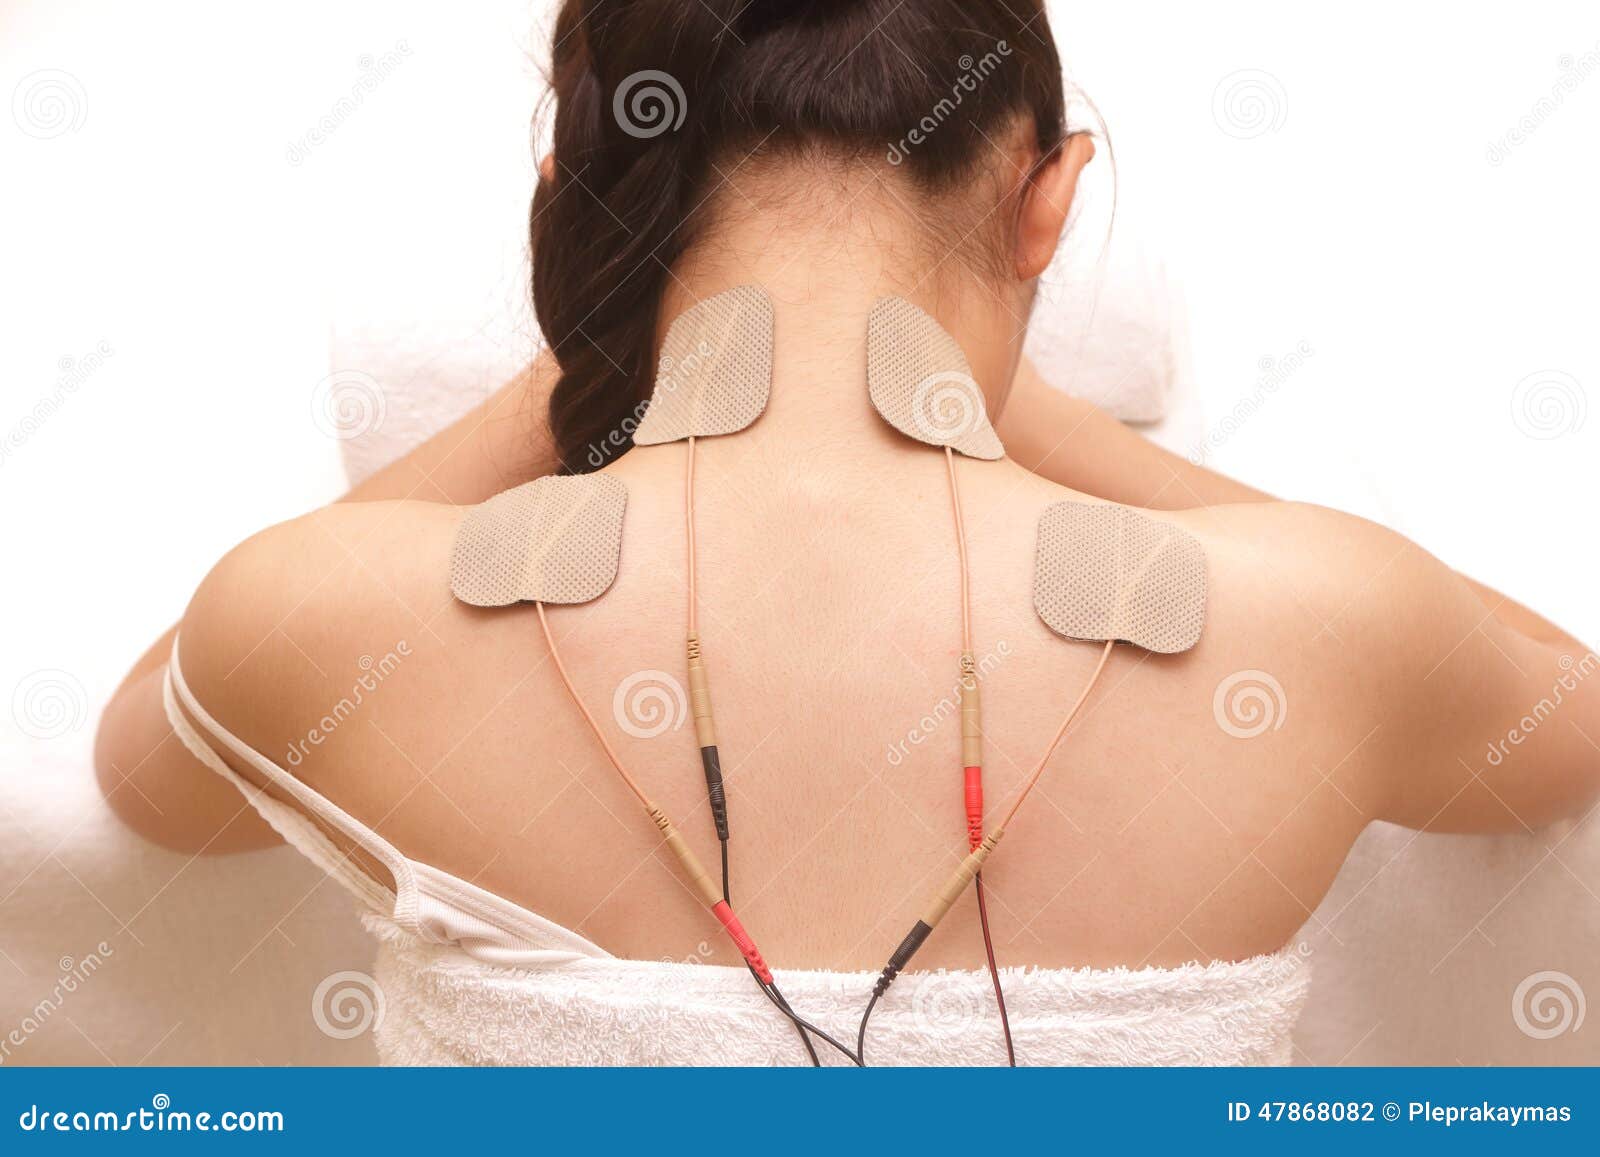 asian woman is doing massage of electrical -stimulation ( tens )